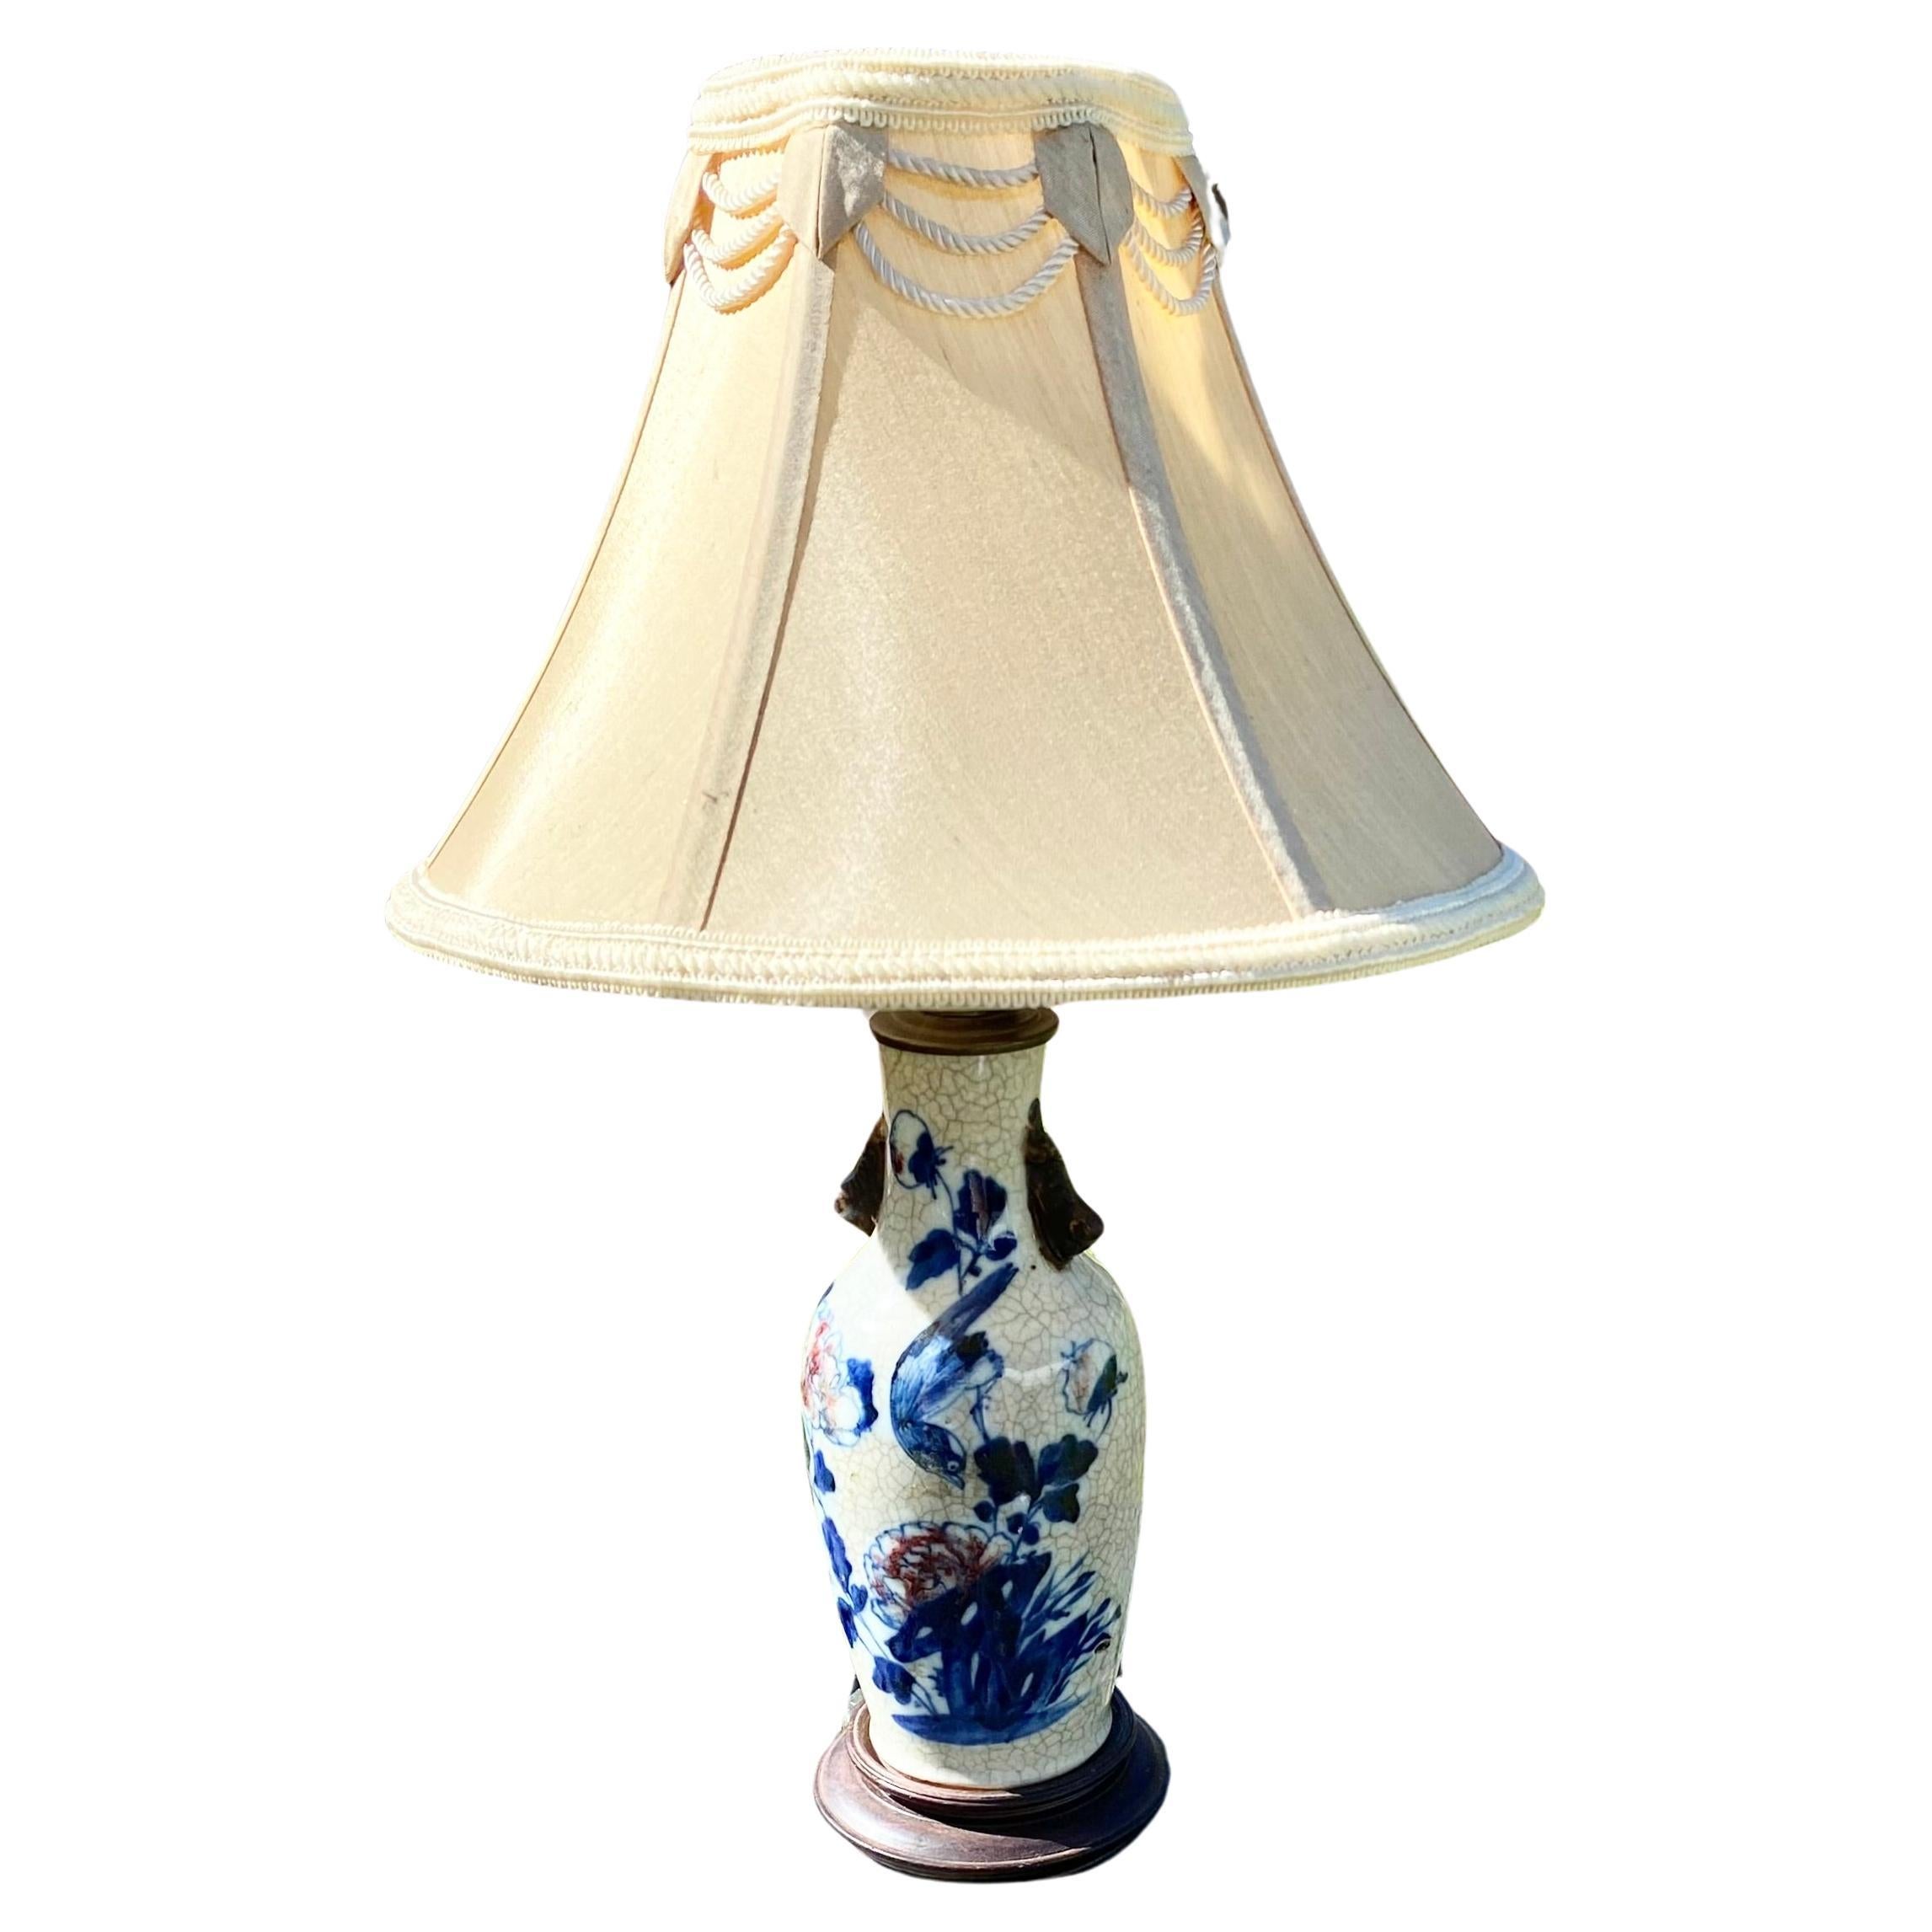 Antique Oriental Porcelain Vase Lamp Off White and Blue Perched Bird For Sale